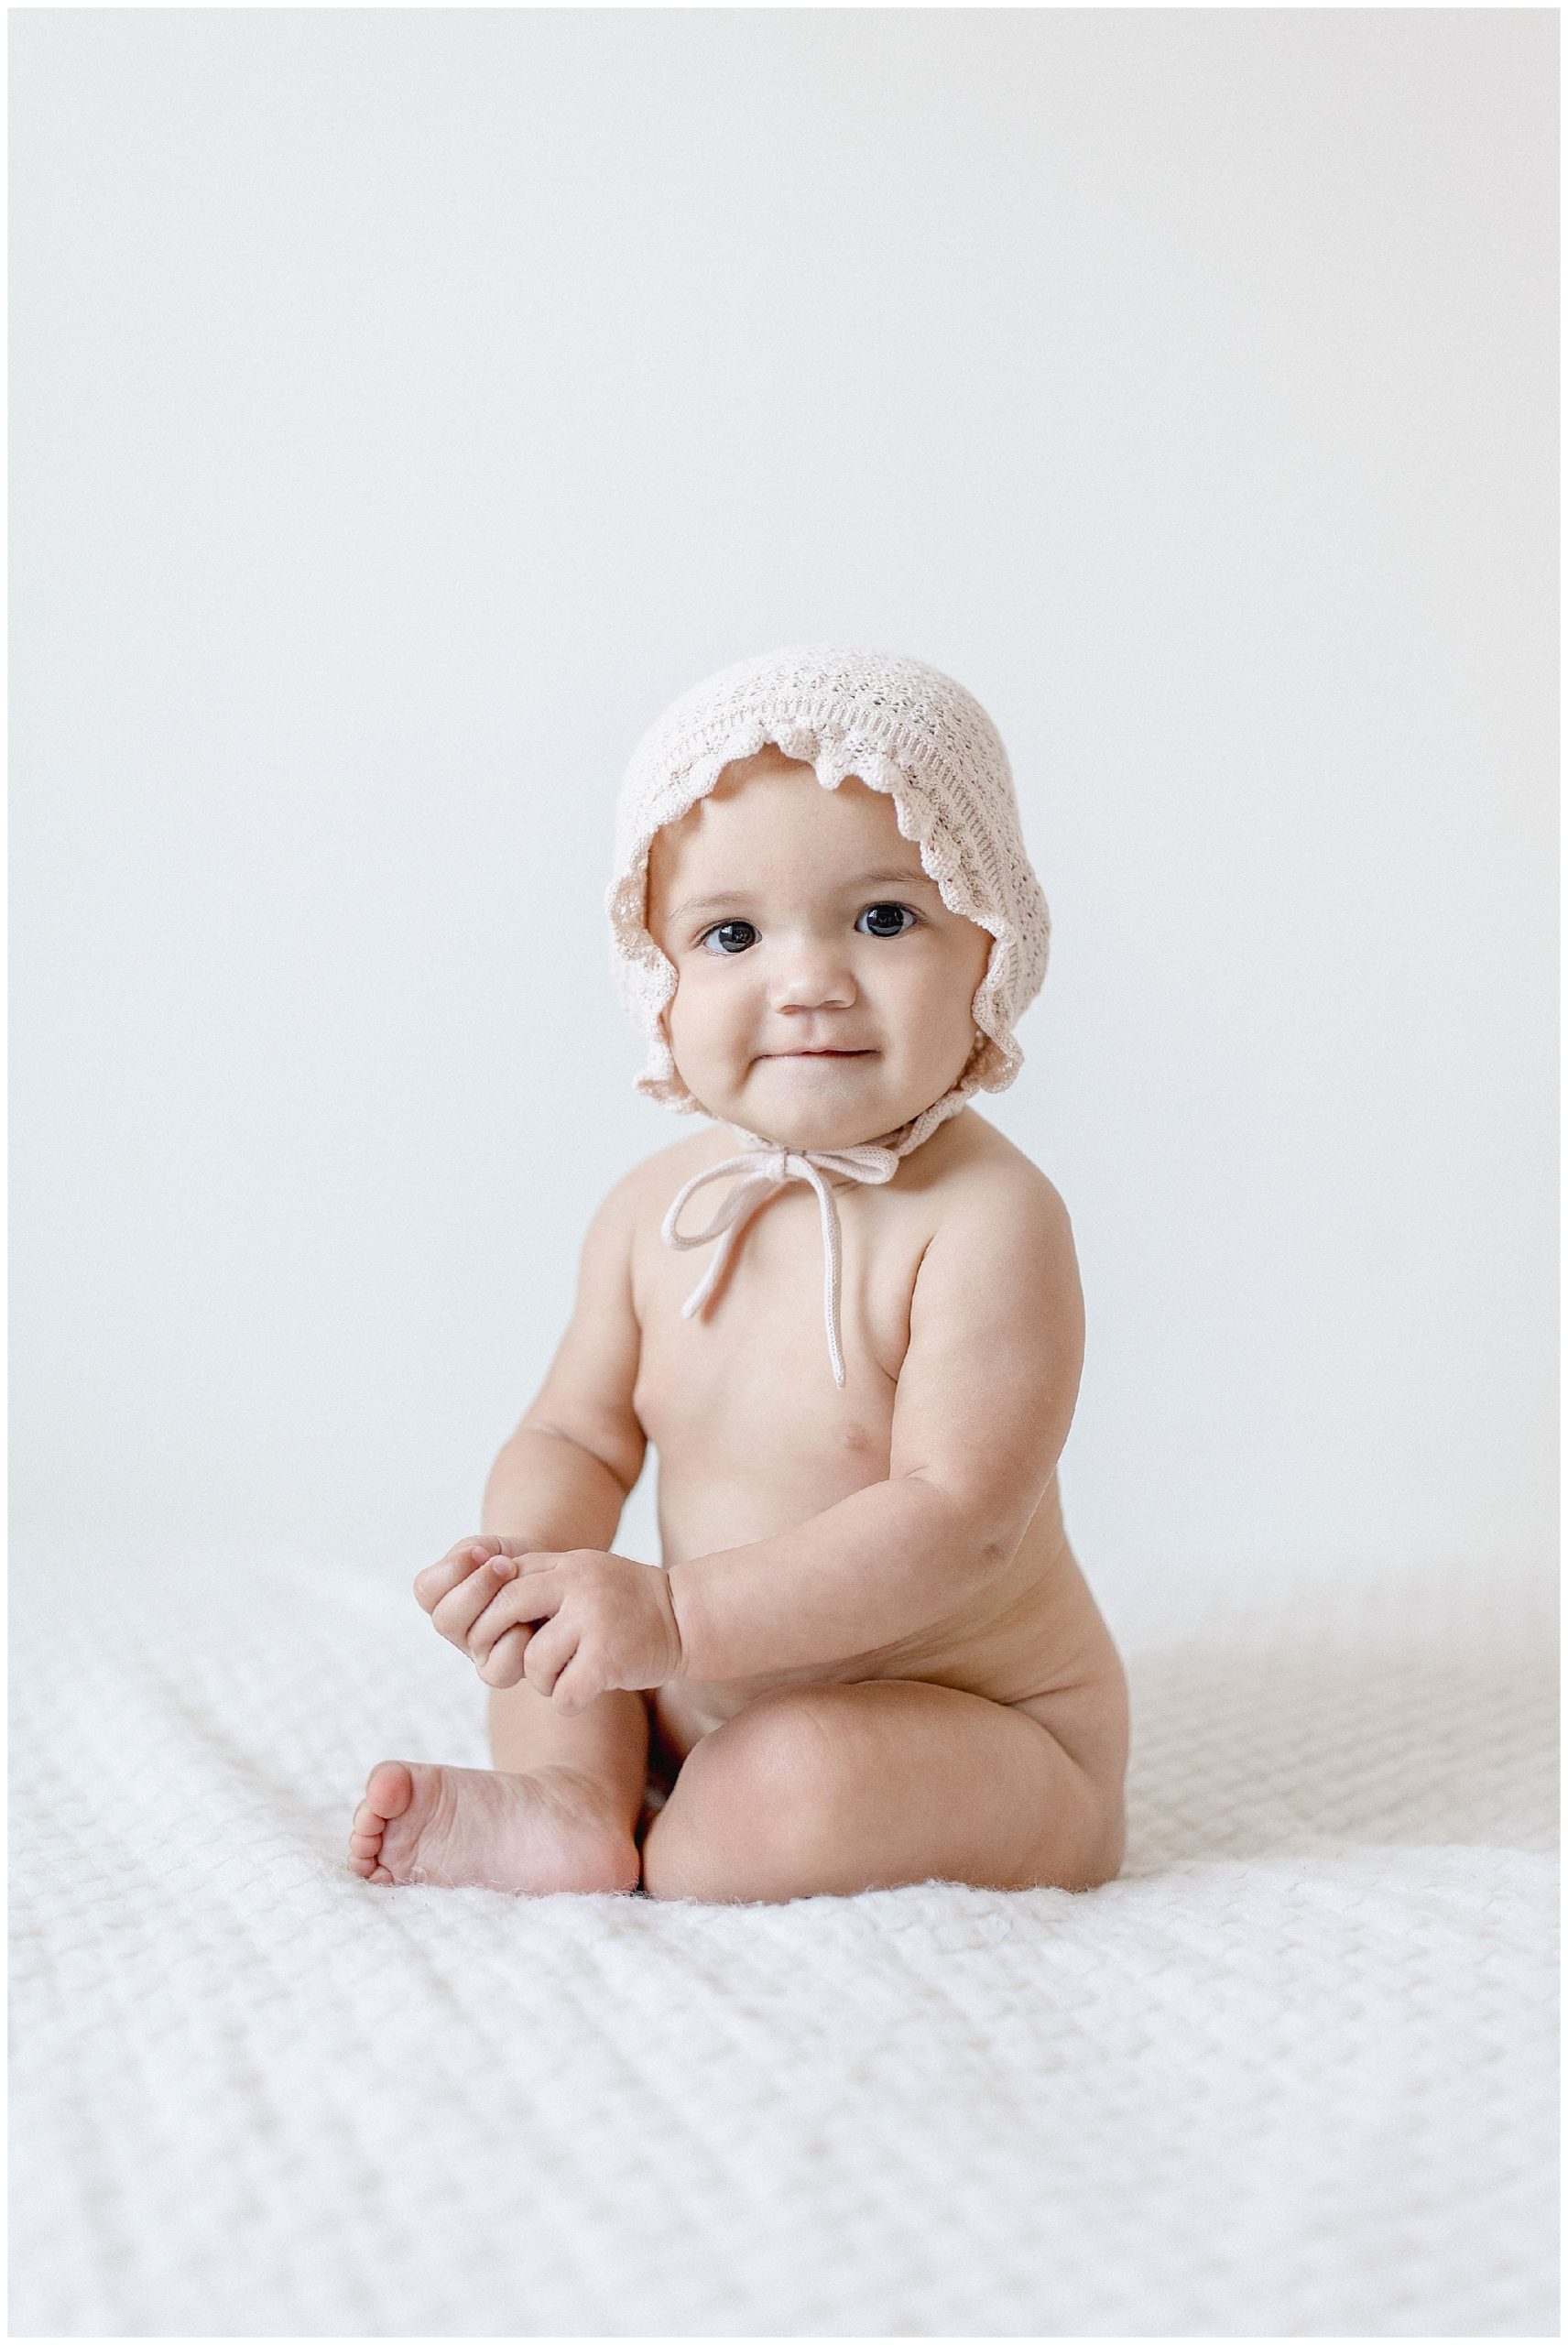 Baby girl in bonnet. Photos by Ivanna Vidal Photography.